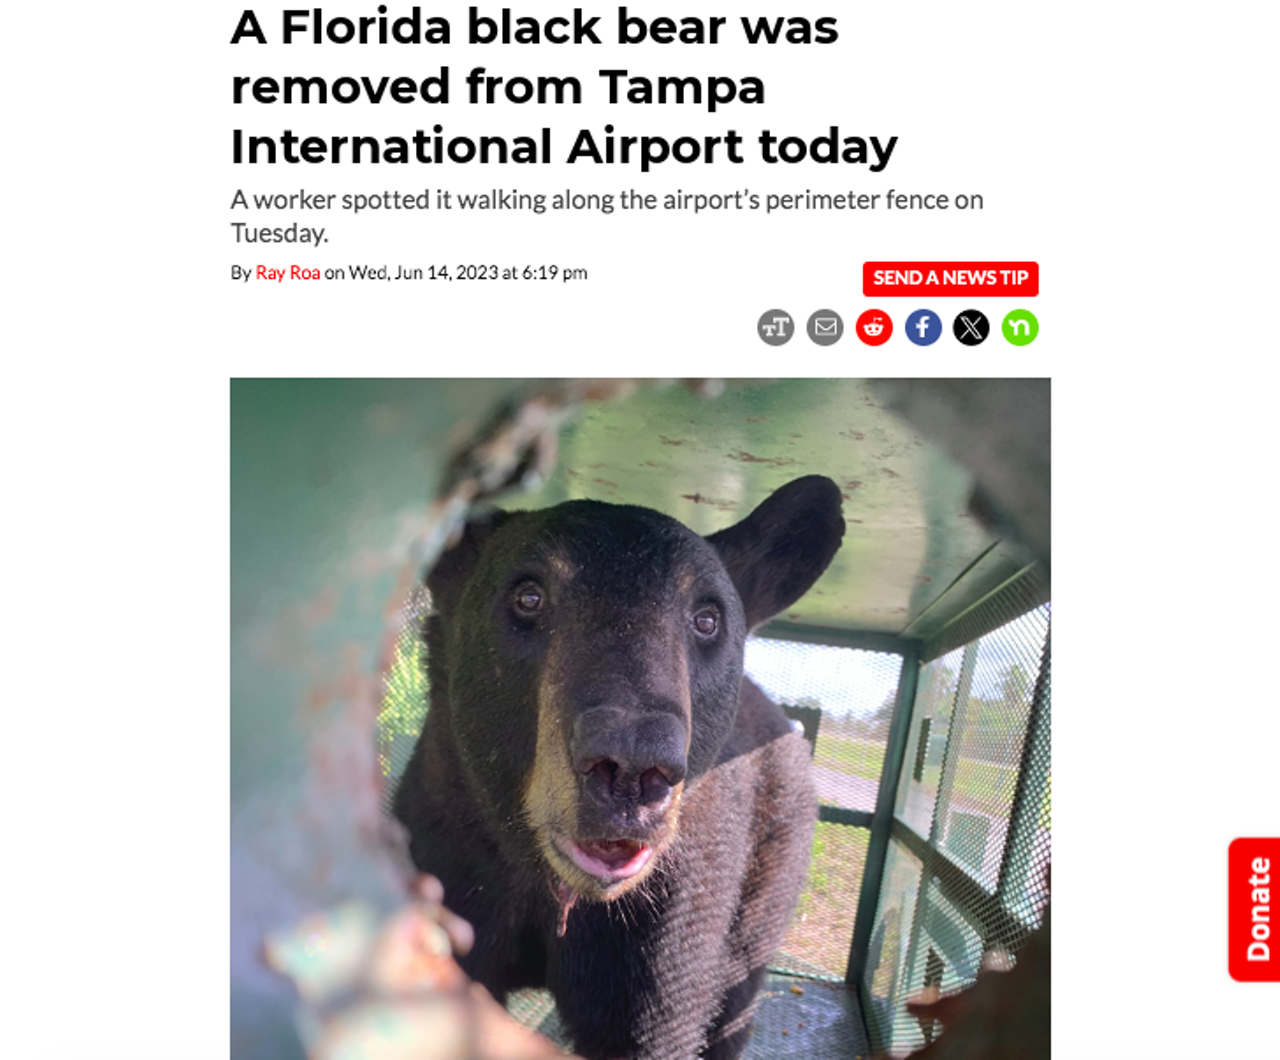 Tampa International Airport said it removed a Florida black bear from the airport campus last summer, adding that it has no previous records of bear incursions on airport property.  A TSA employee spotted the bear walking along the airport perimeter fence near Hillsborough Avenue, according to airport officials. The sighting was reported to Hillsborough County Aviation Authority. Read the full story here. 